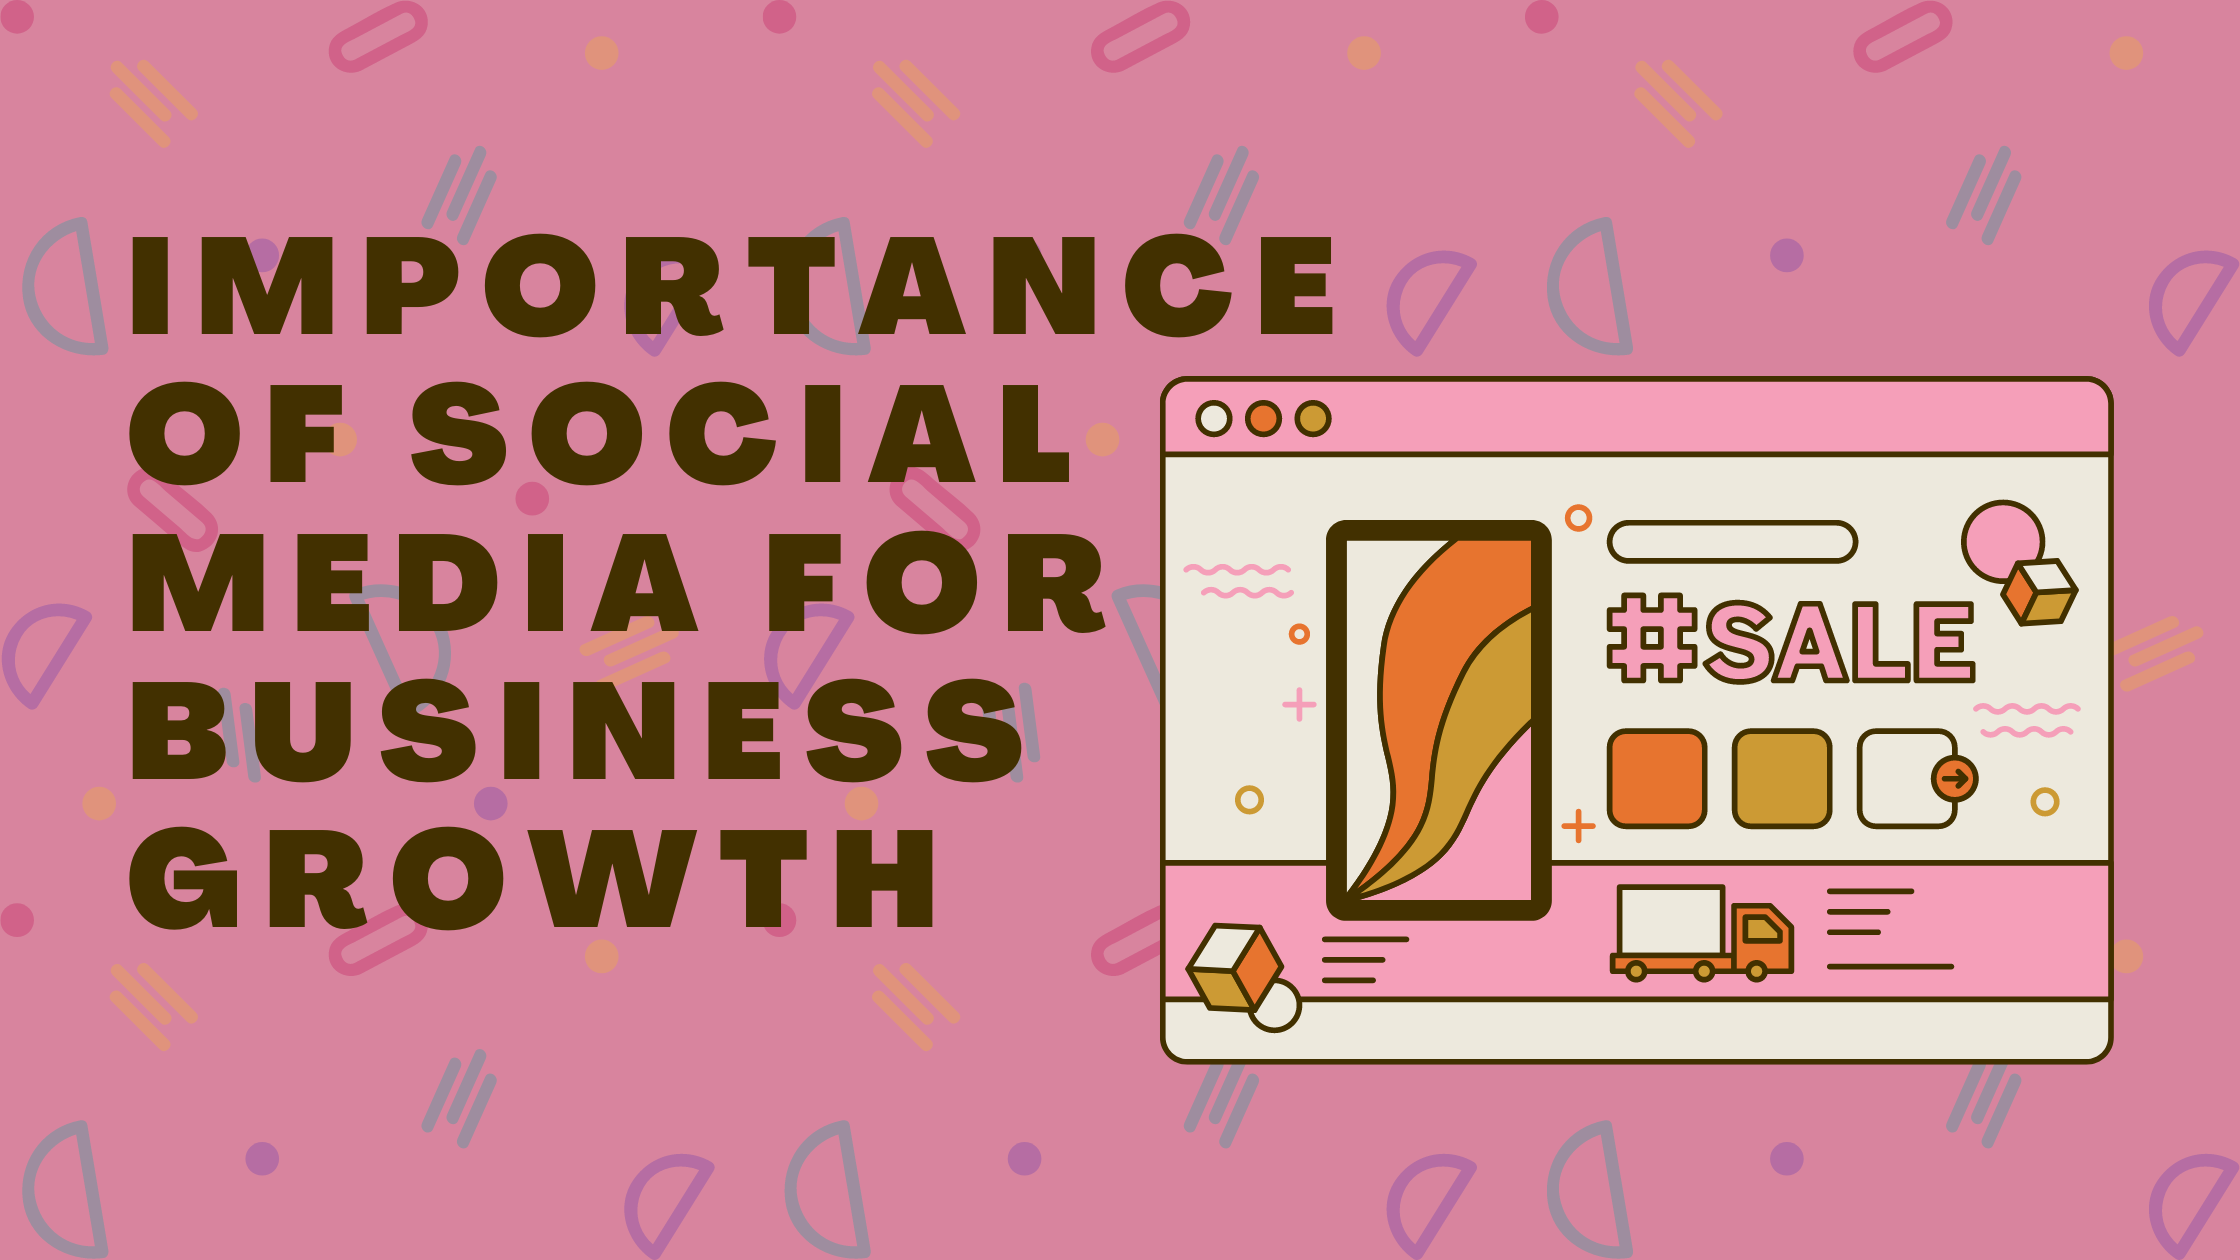 Importance of Social Media for Business Growth